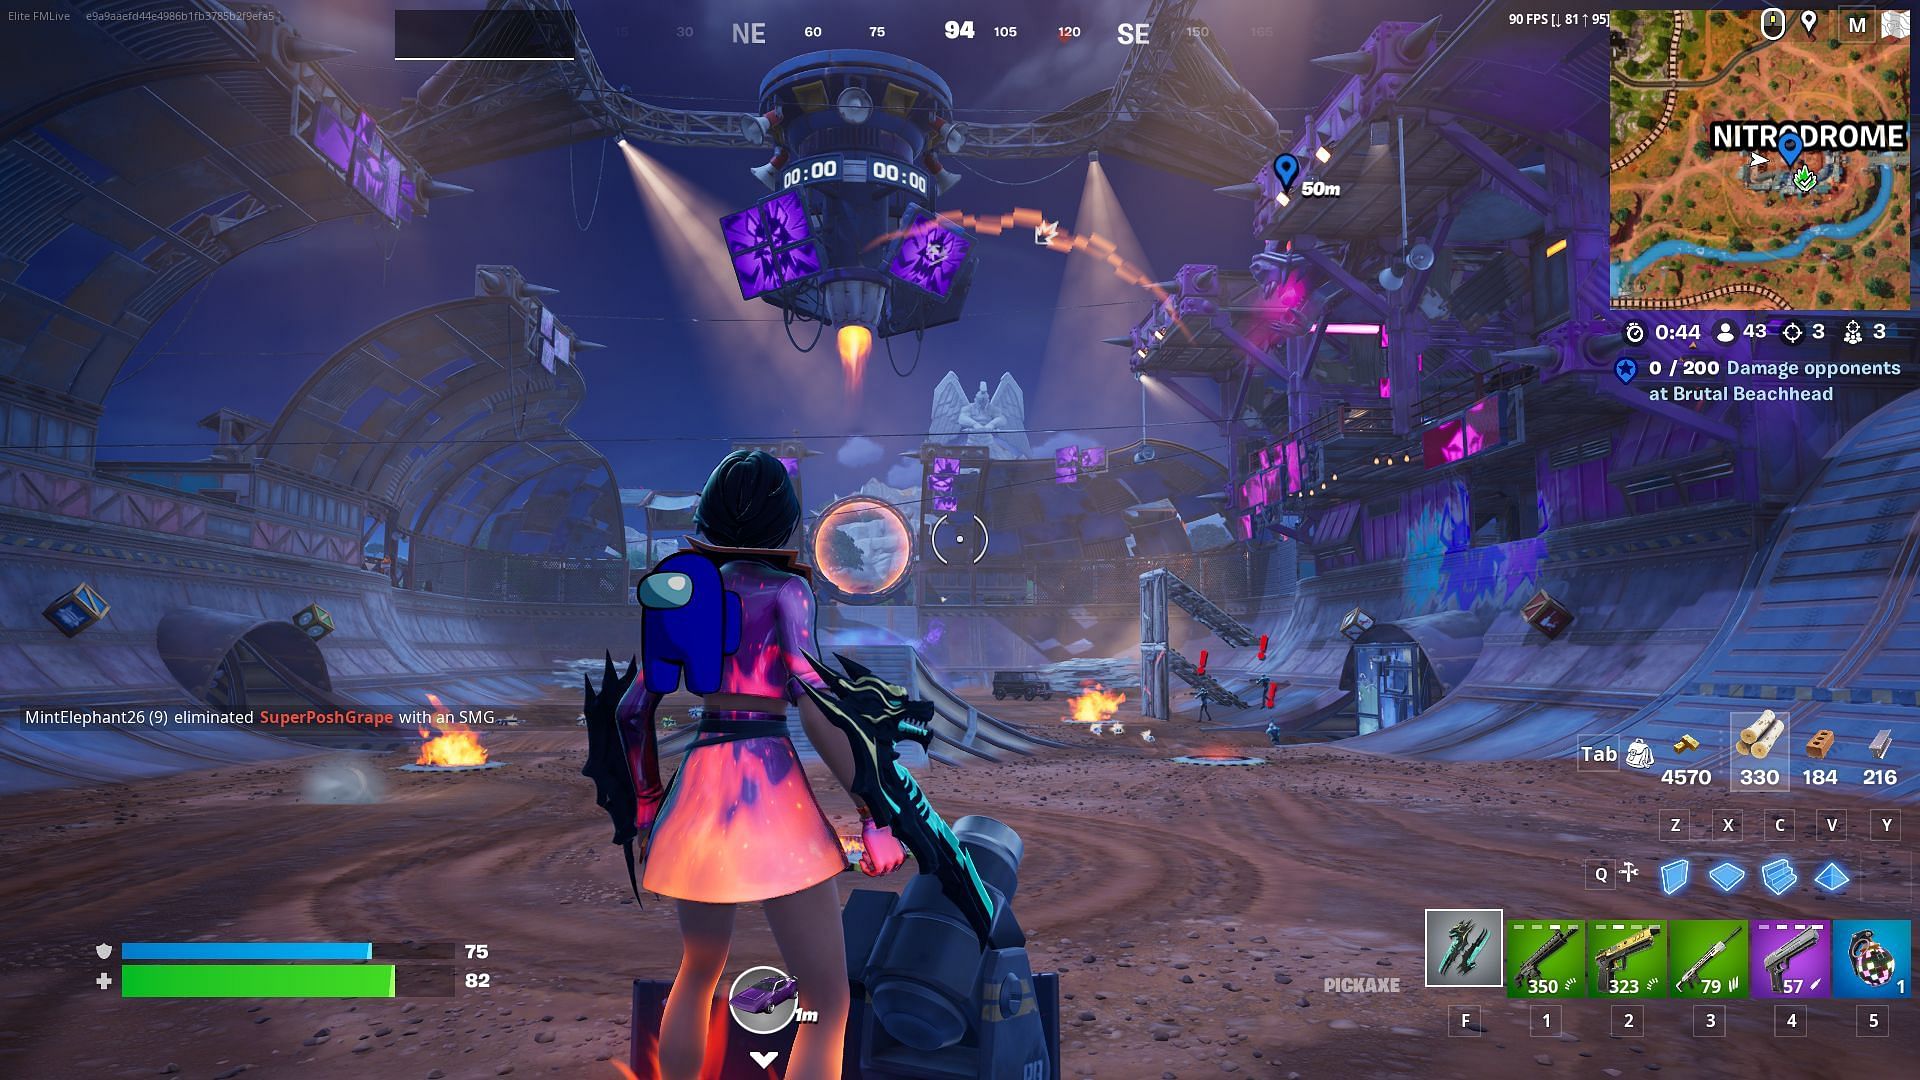 Nitrodrome is one of the most chaotic and loot-heavy locations on the map (Image Via Epic Games)